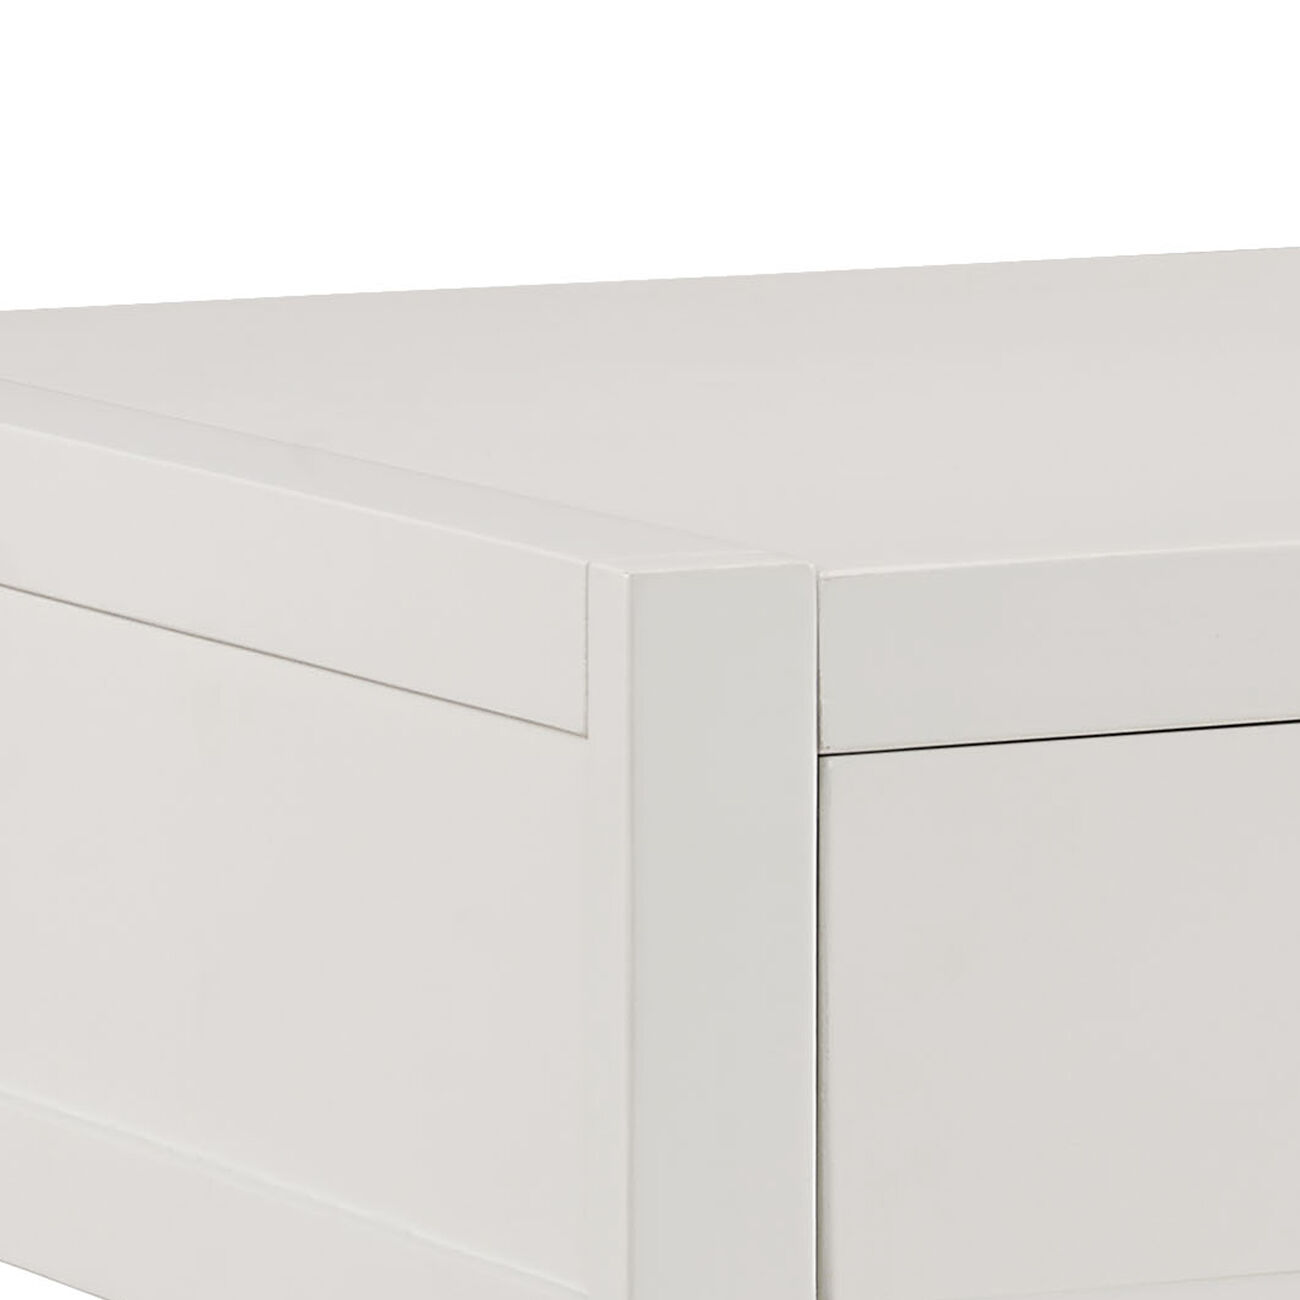 Wooden Coffee Table With Two Drawers and One Open Bottom Shelf, White